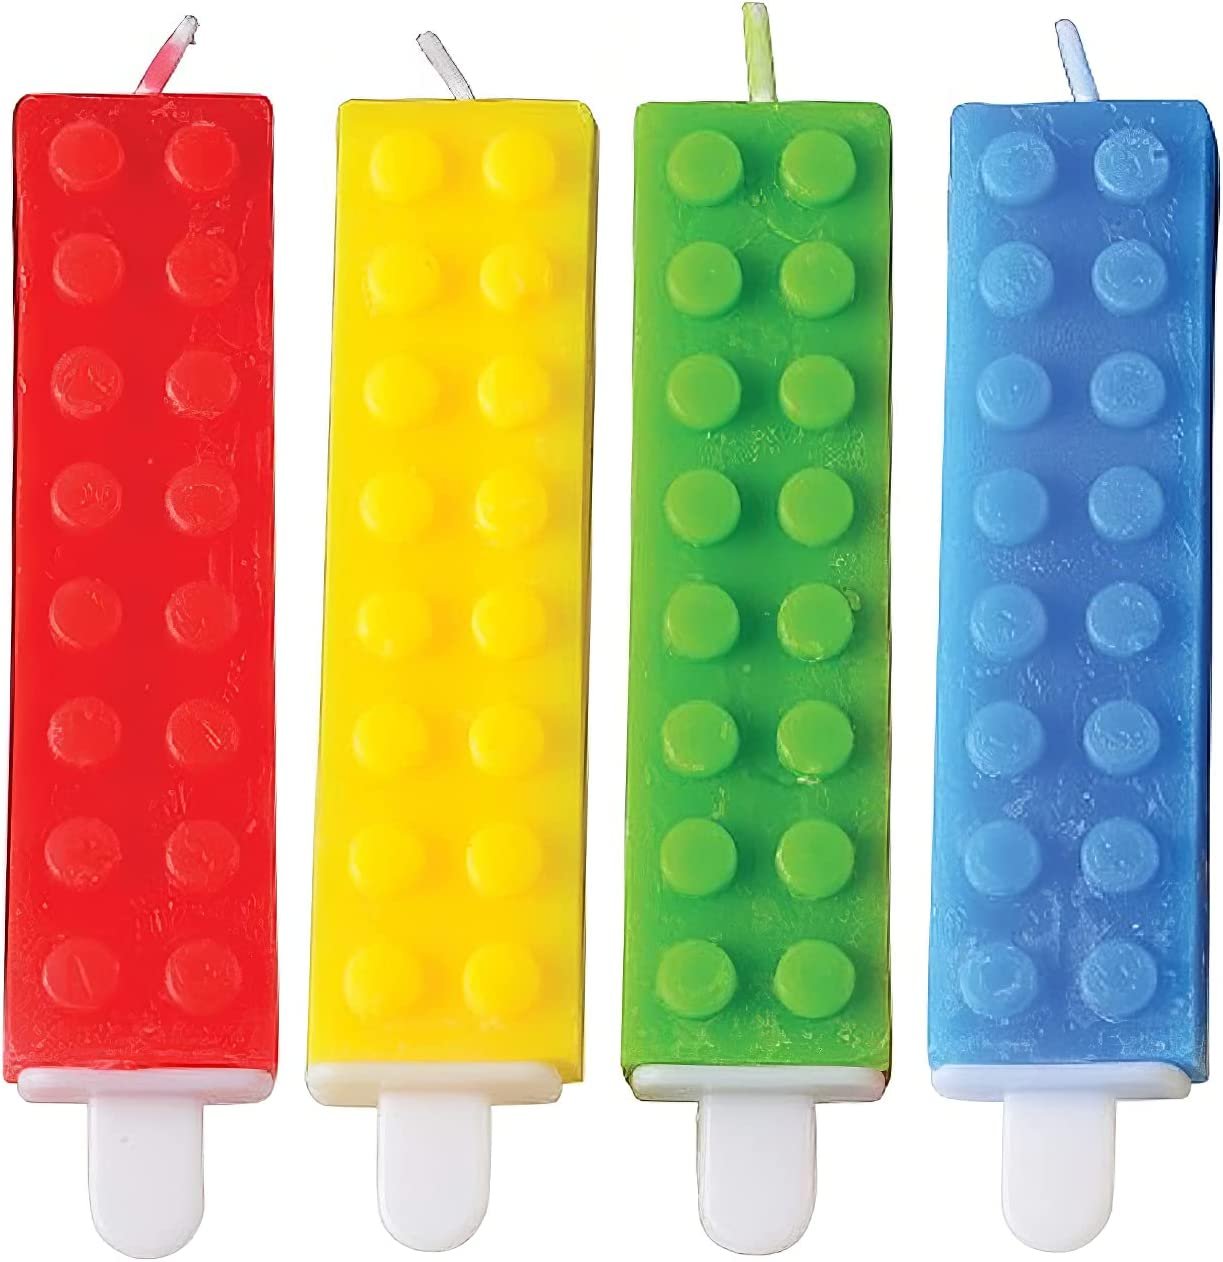 Brick Candles, Building Block Themed Birthday Cake Candles - Pack of 4 - Red, Yellow, Green, and Blue Brick Party Candles, Colorful Building Block Birthday Party Supplies and Decoration